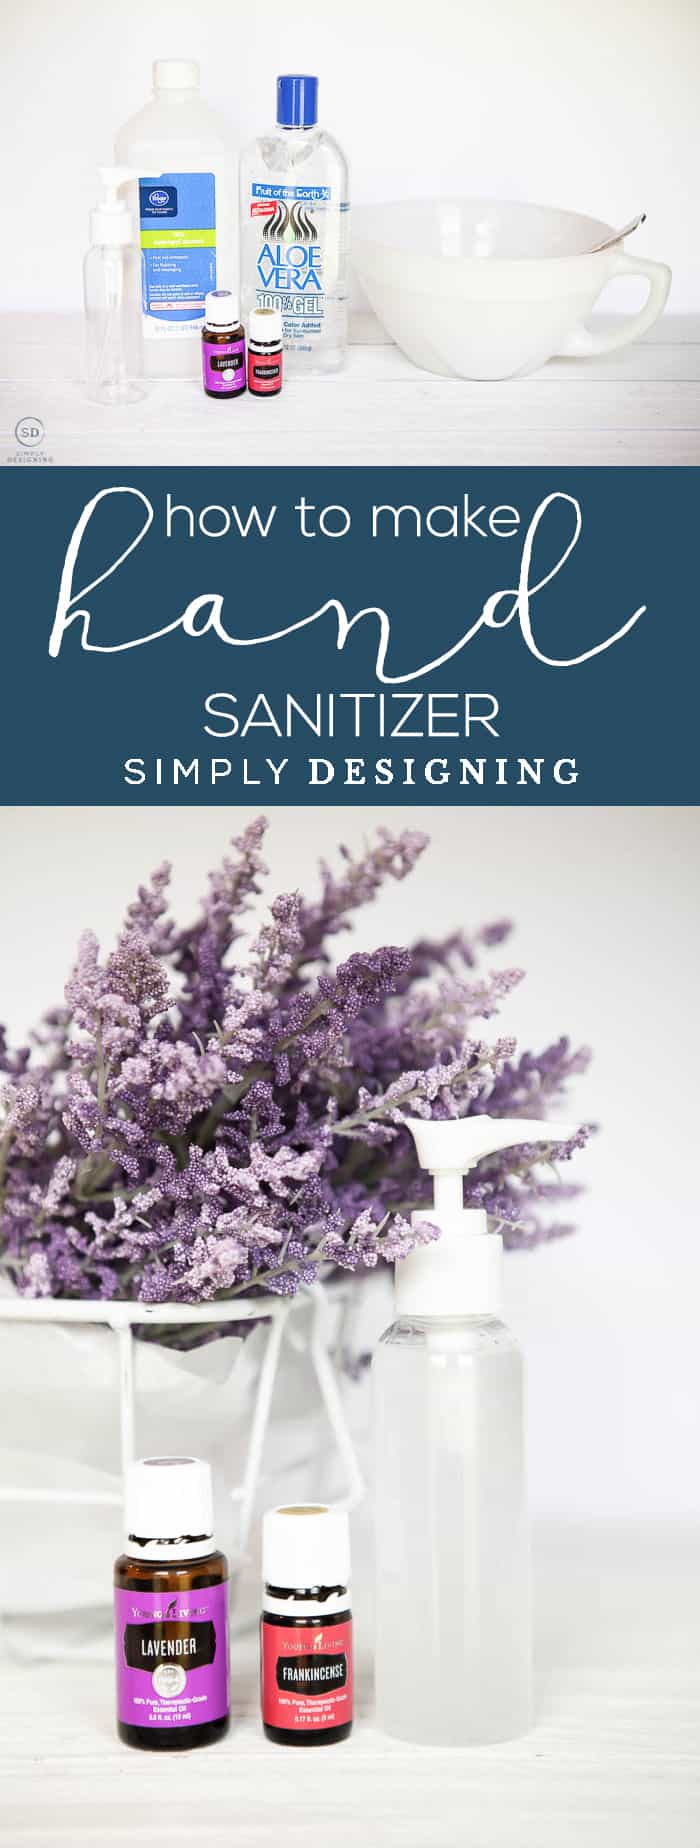 How to make Hand Sanitizer - an easy safer and less expensive natural alternative